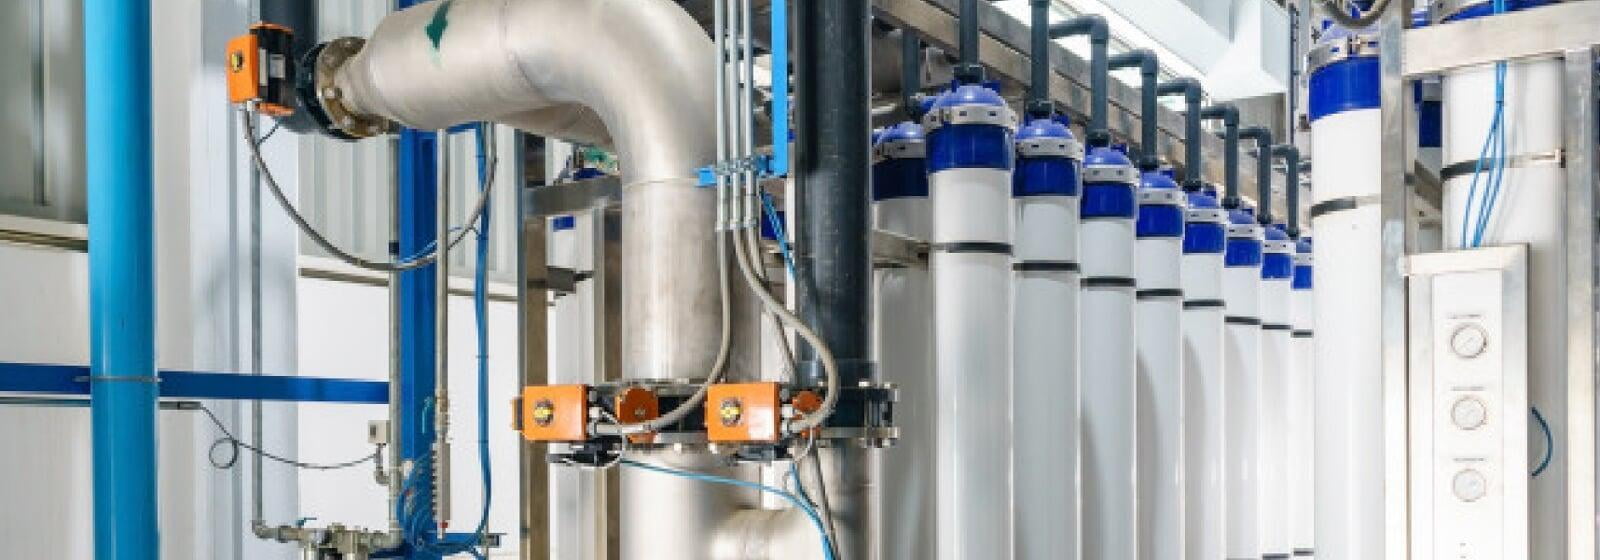 Importance of Filtration in Water Treatment for Process Water & Wastewater Reuse